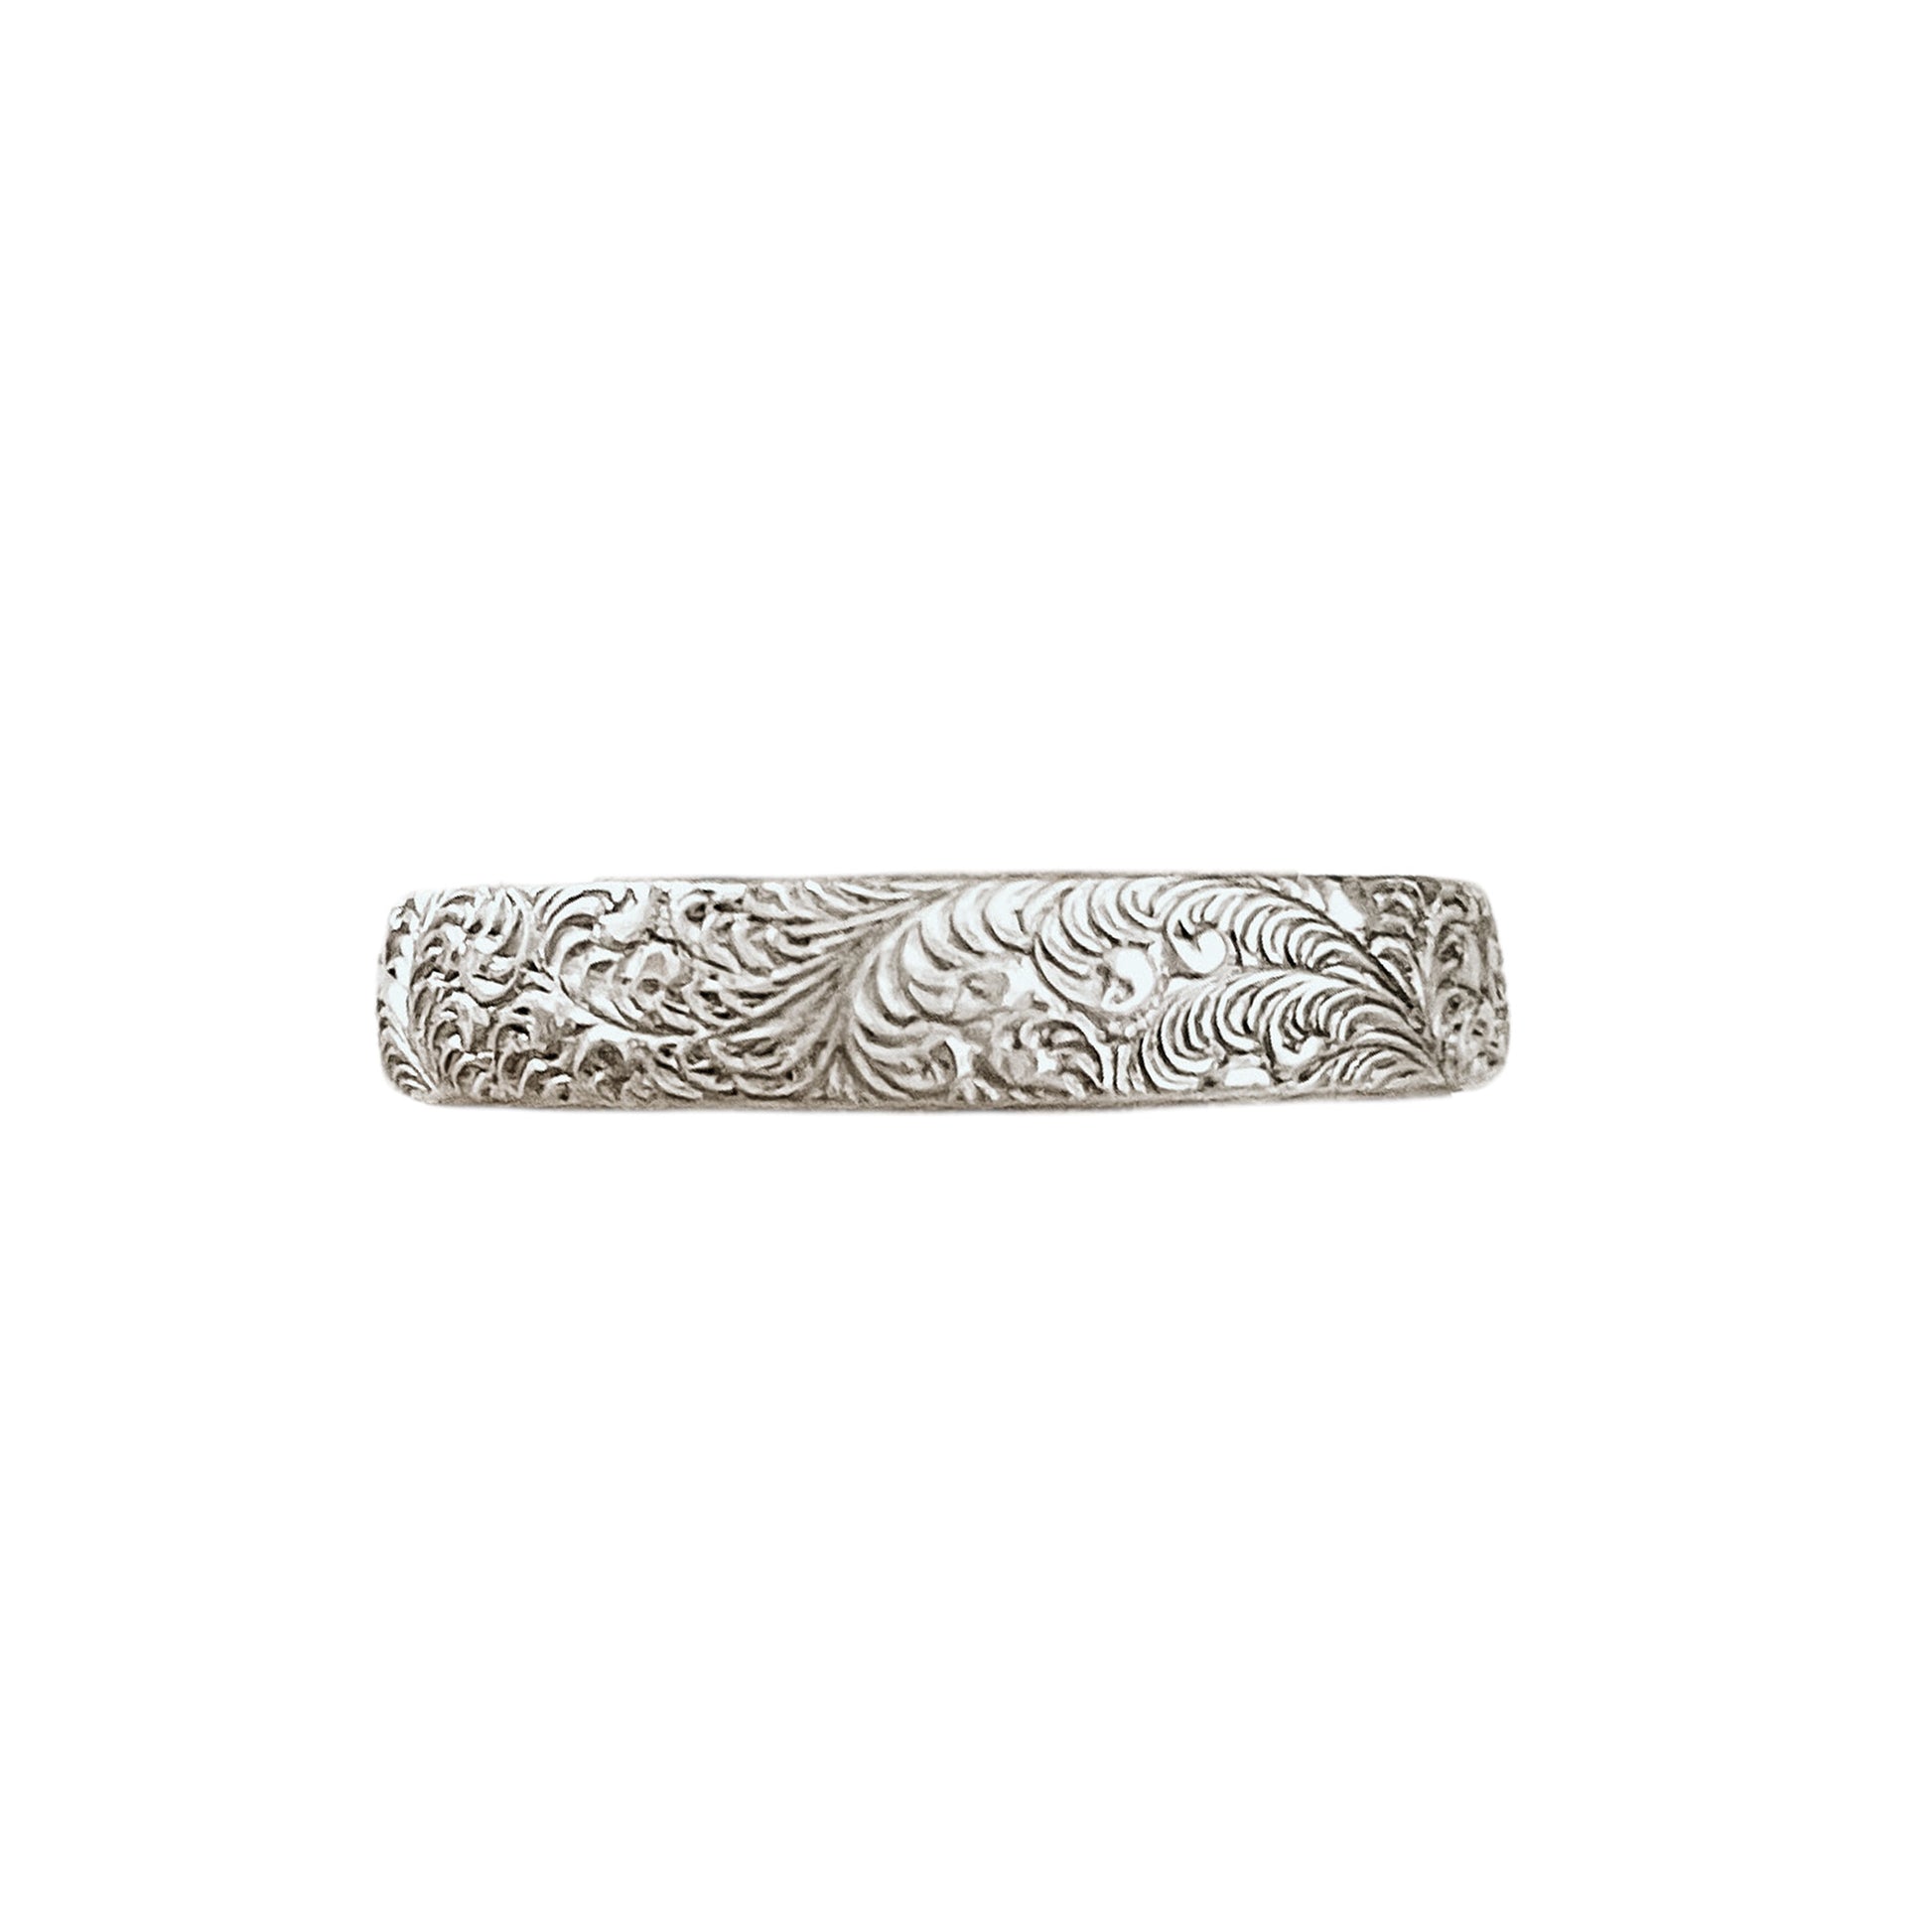 Feathered Sterling Silver Stacking Ring shown in bright finish.